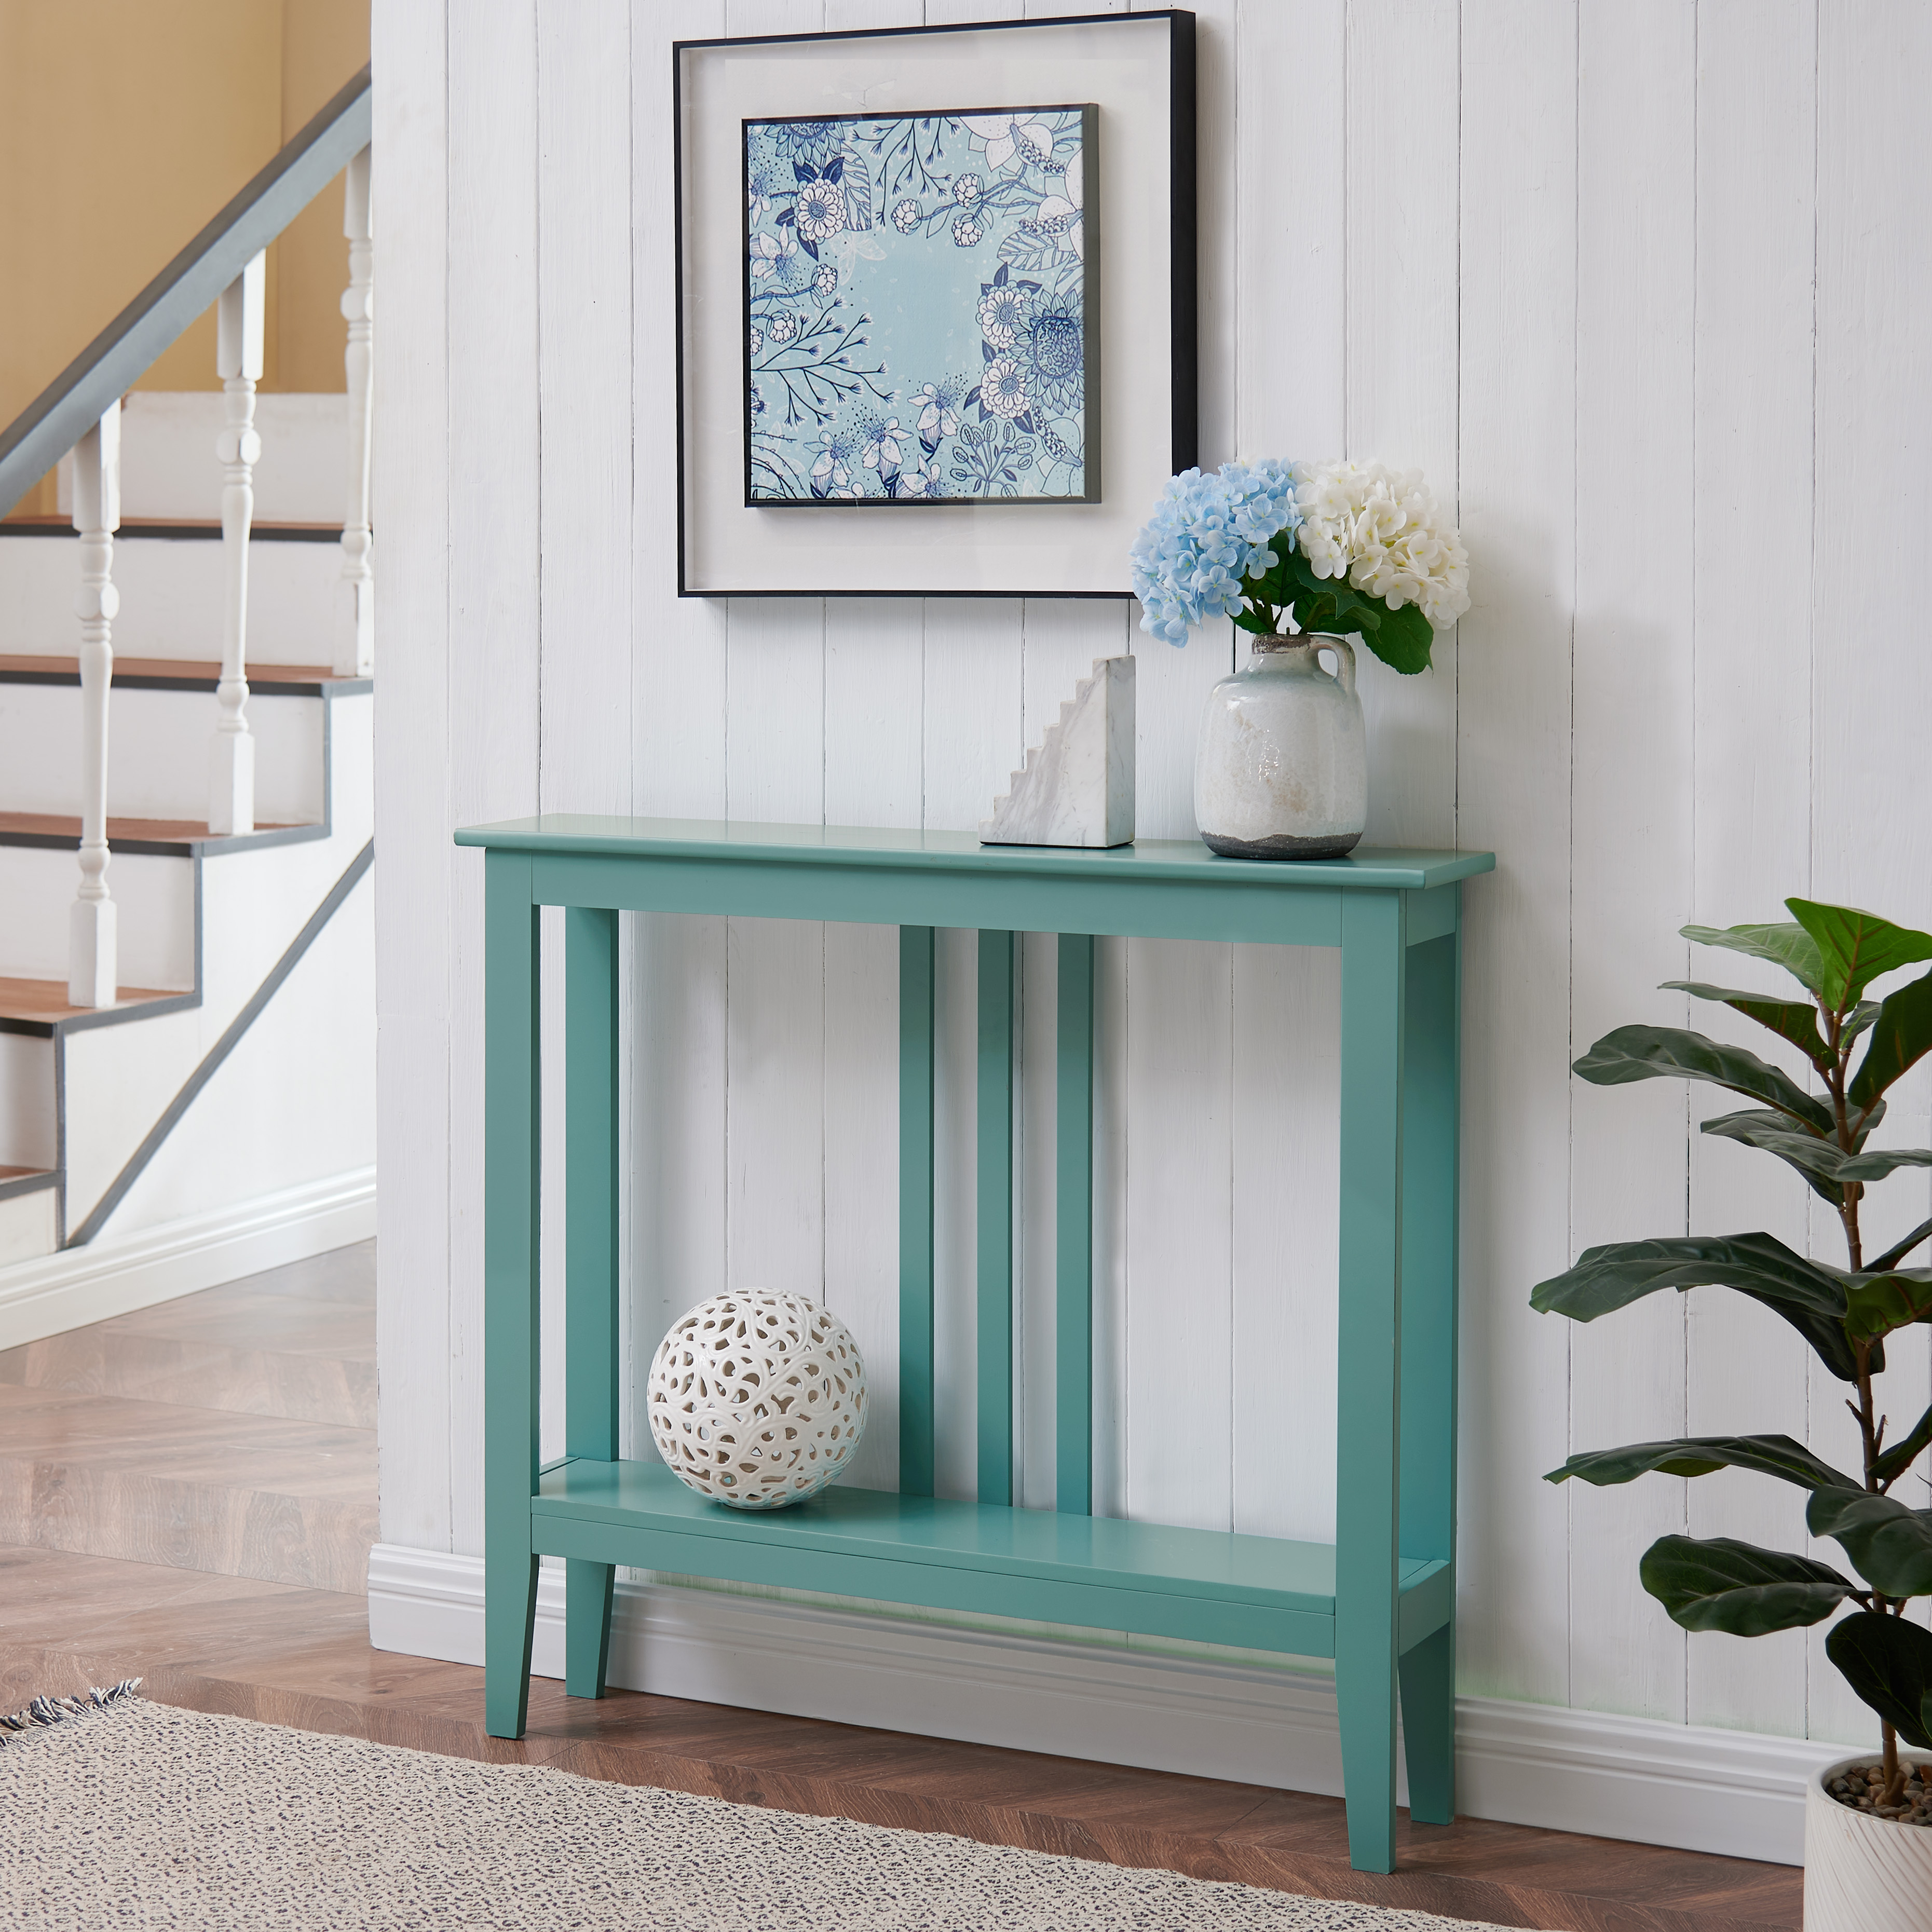 Balfour Console Table (Teal)